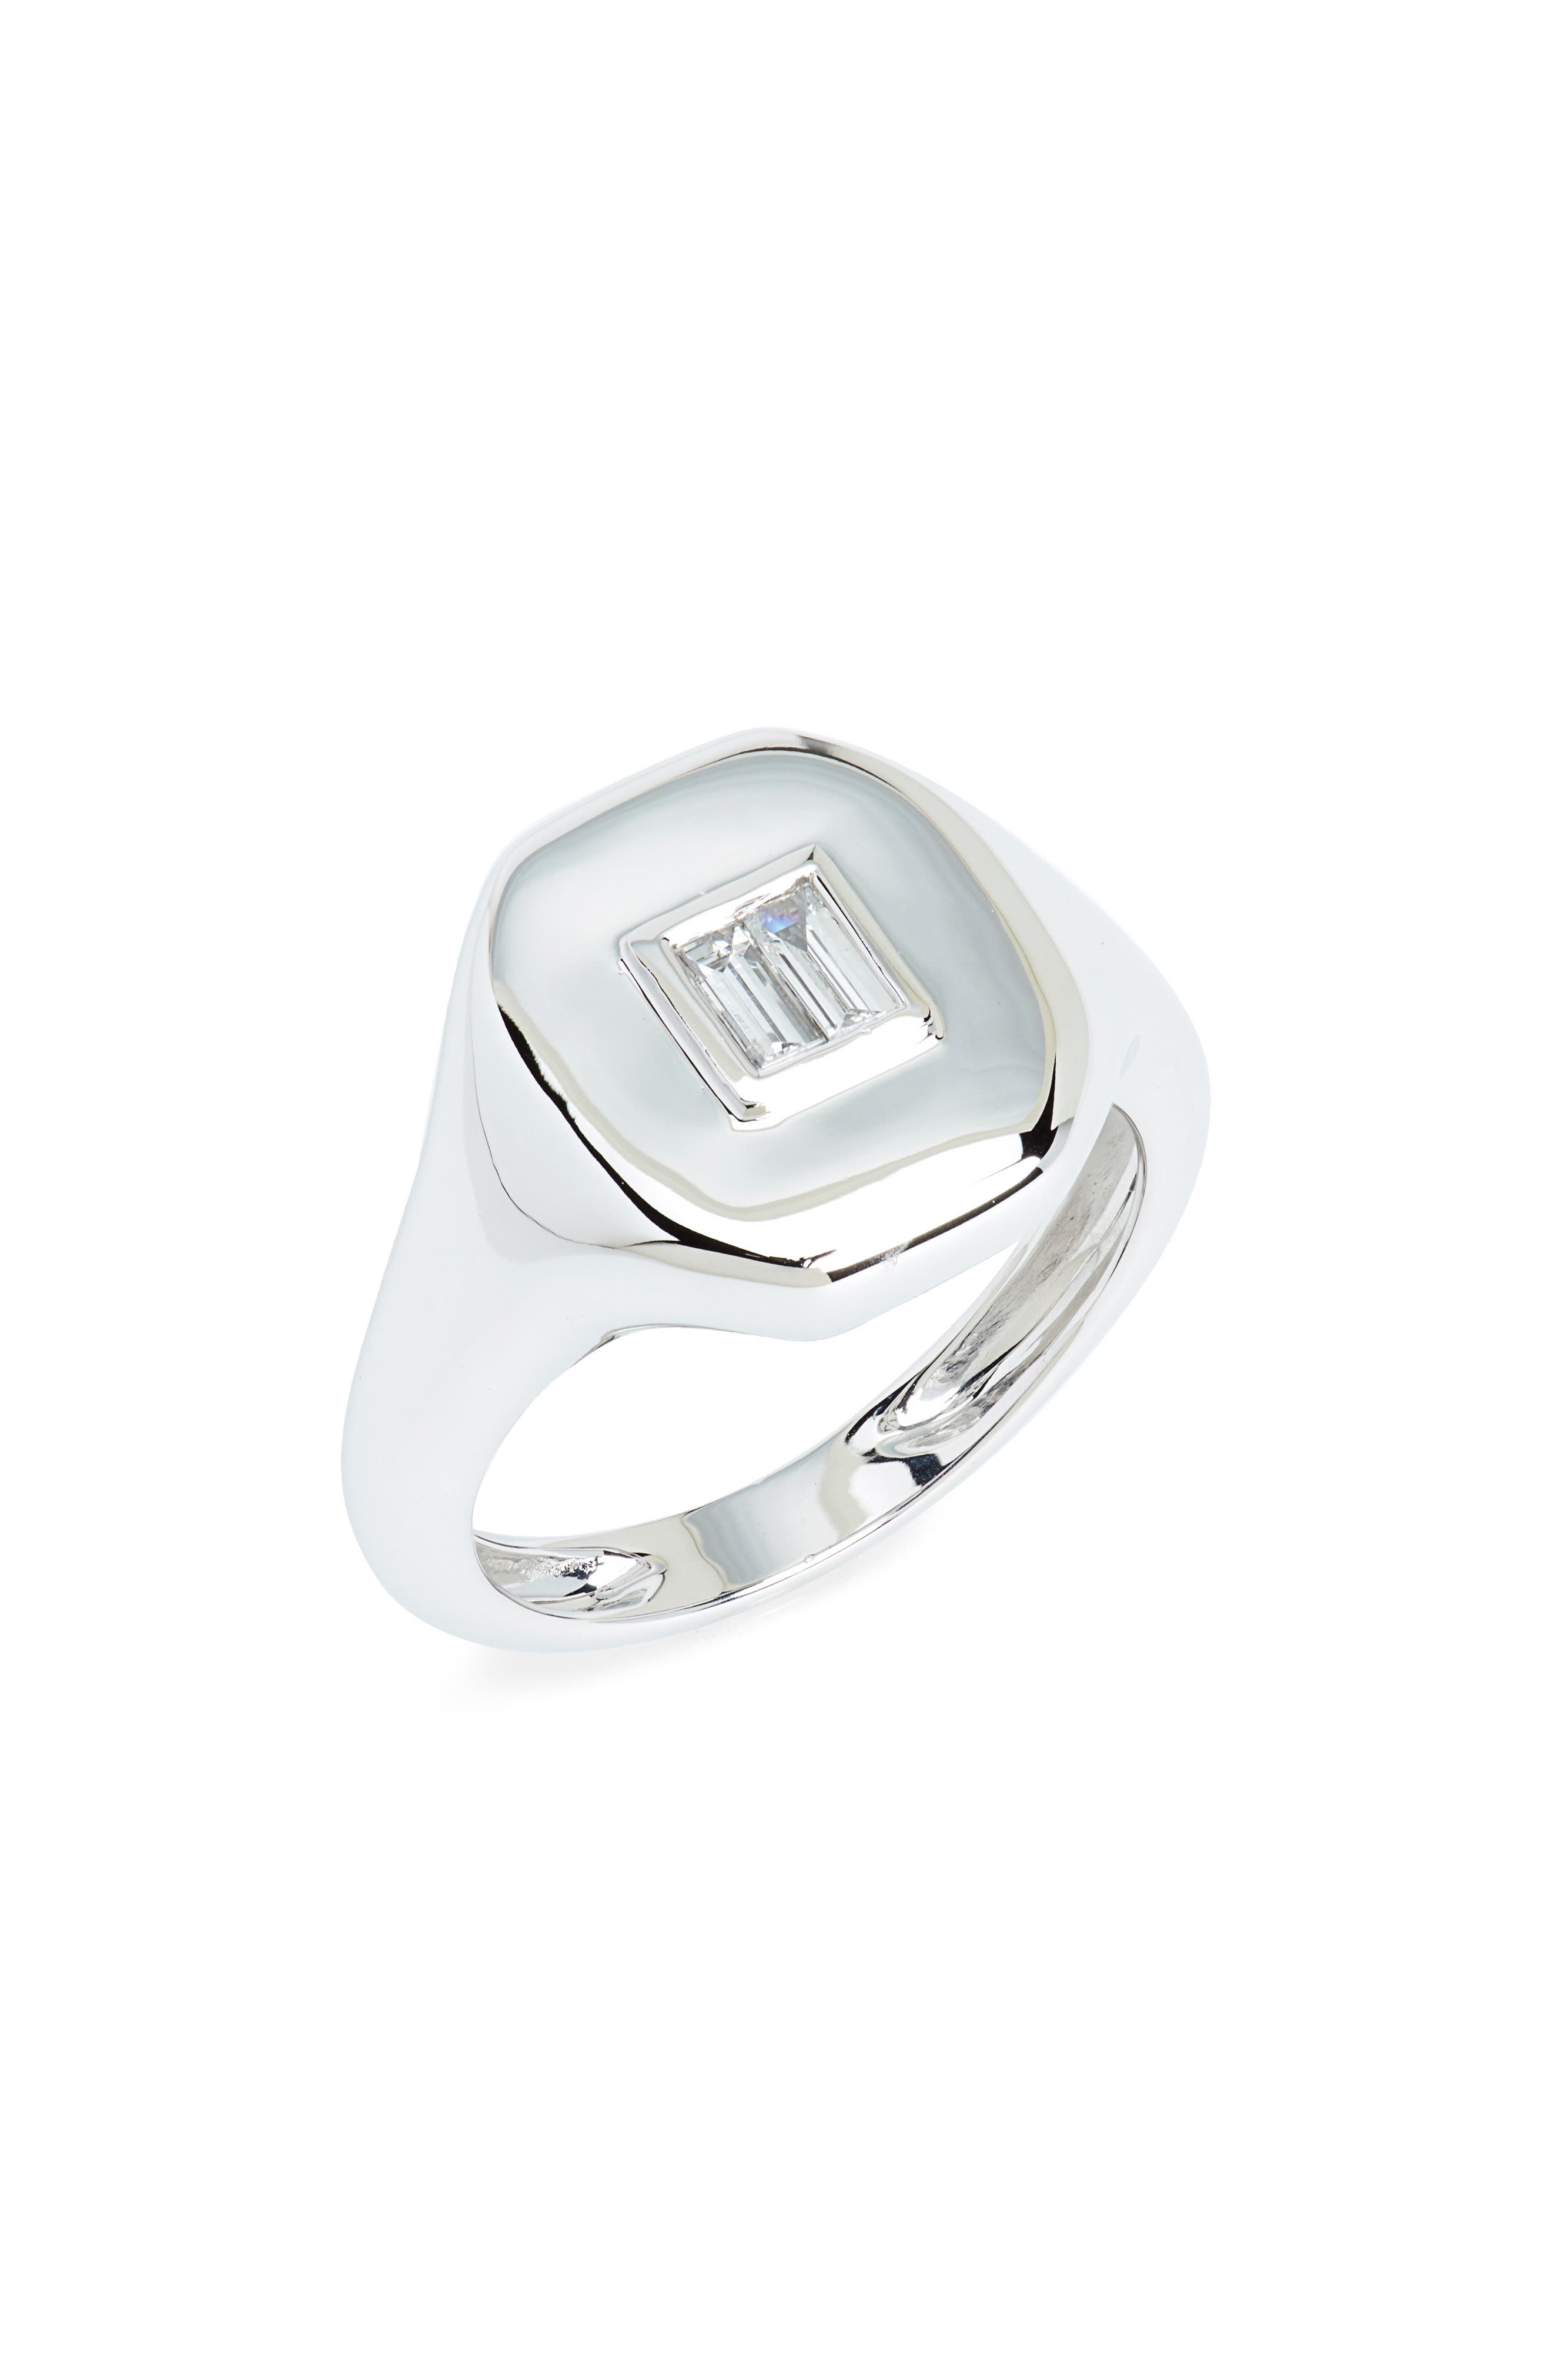 SHAY Baguette Diamond Signet Pinky Ring in White Gold at Nordstrom, Size 3.5 Us